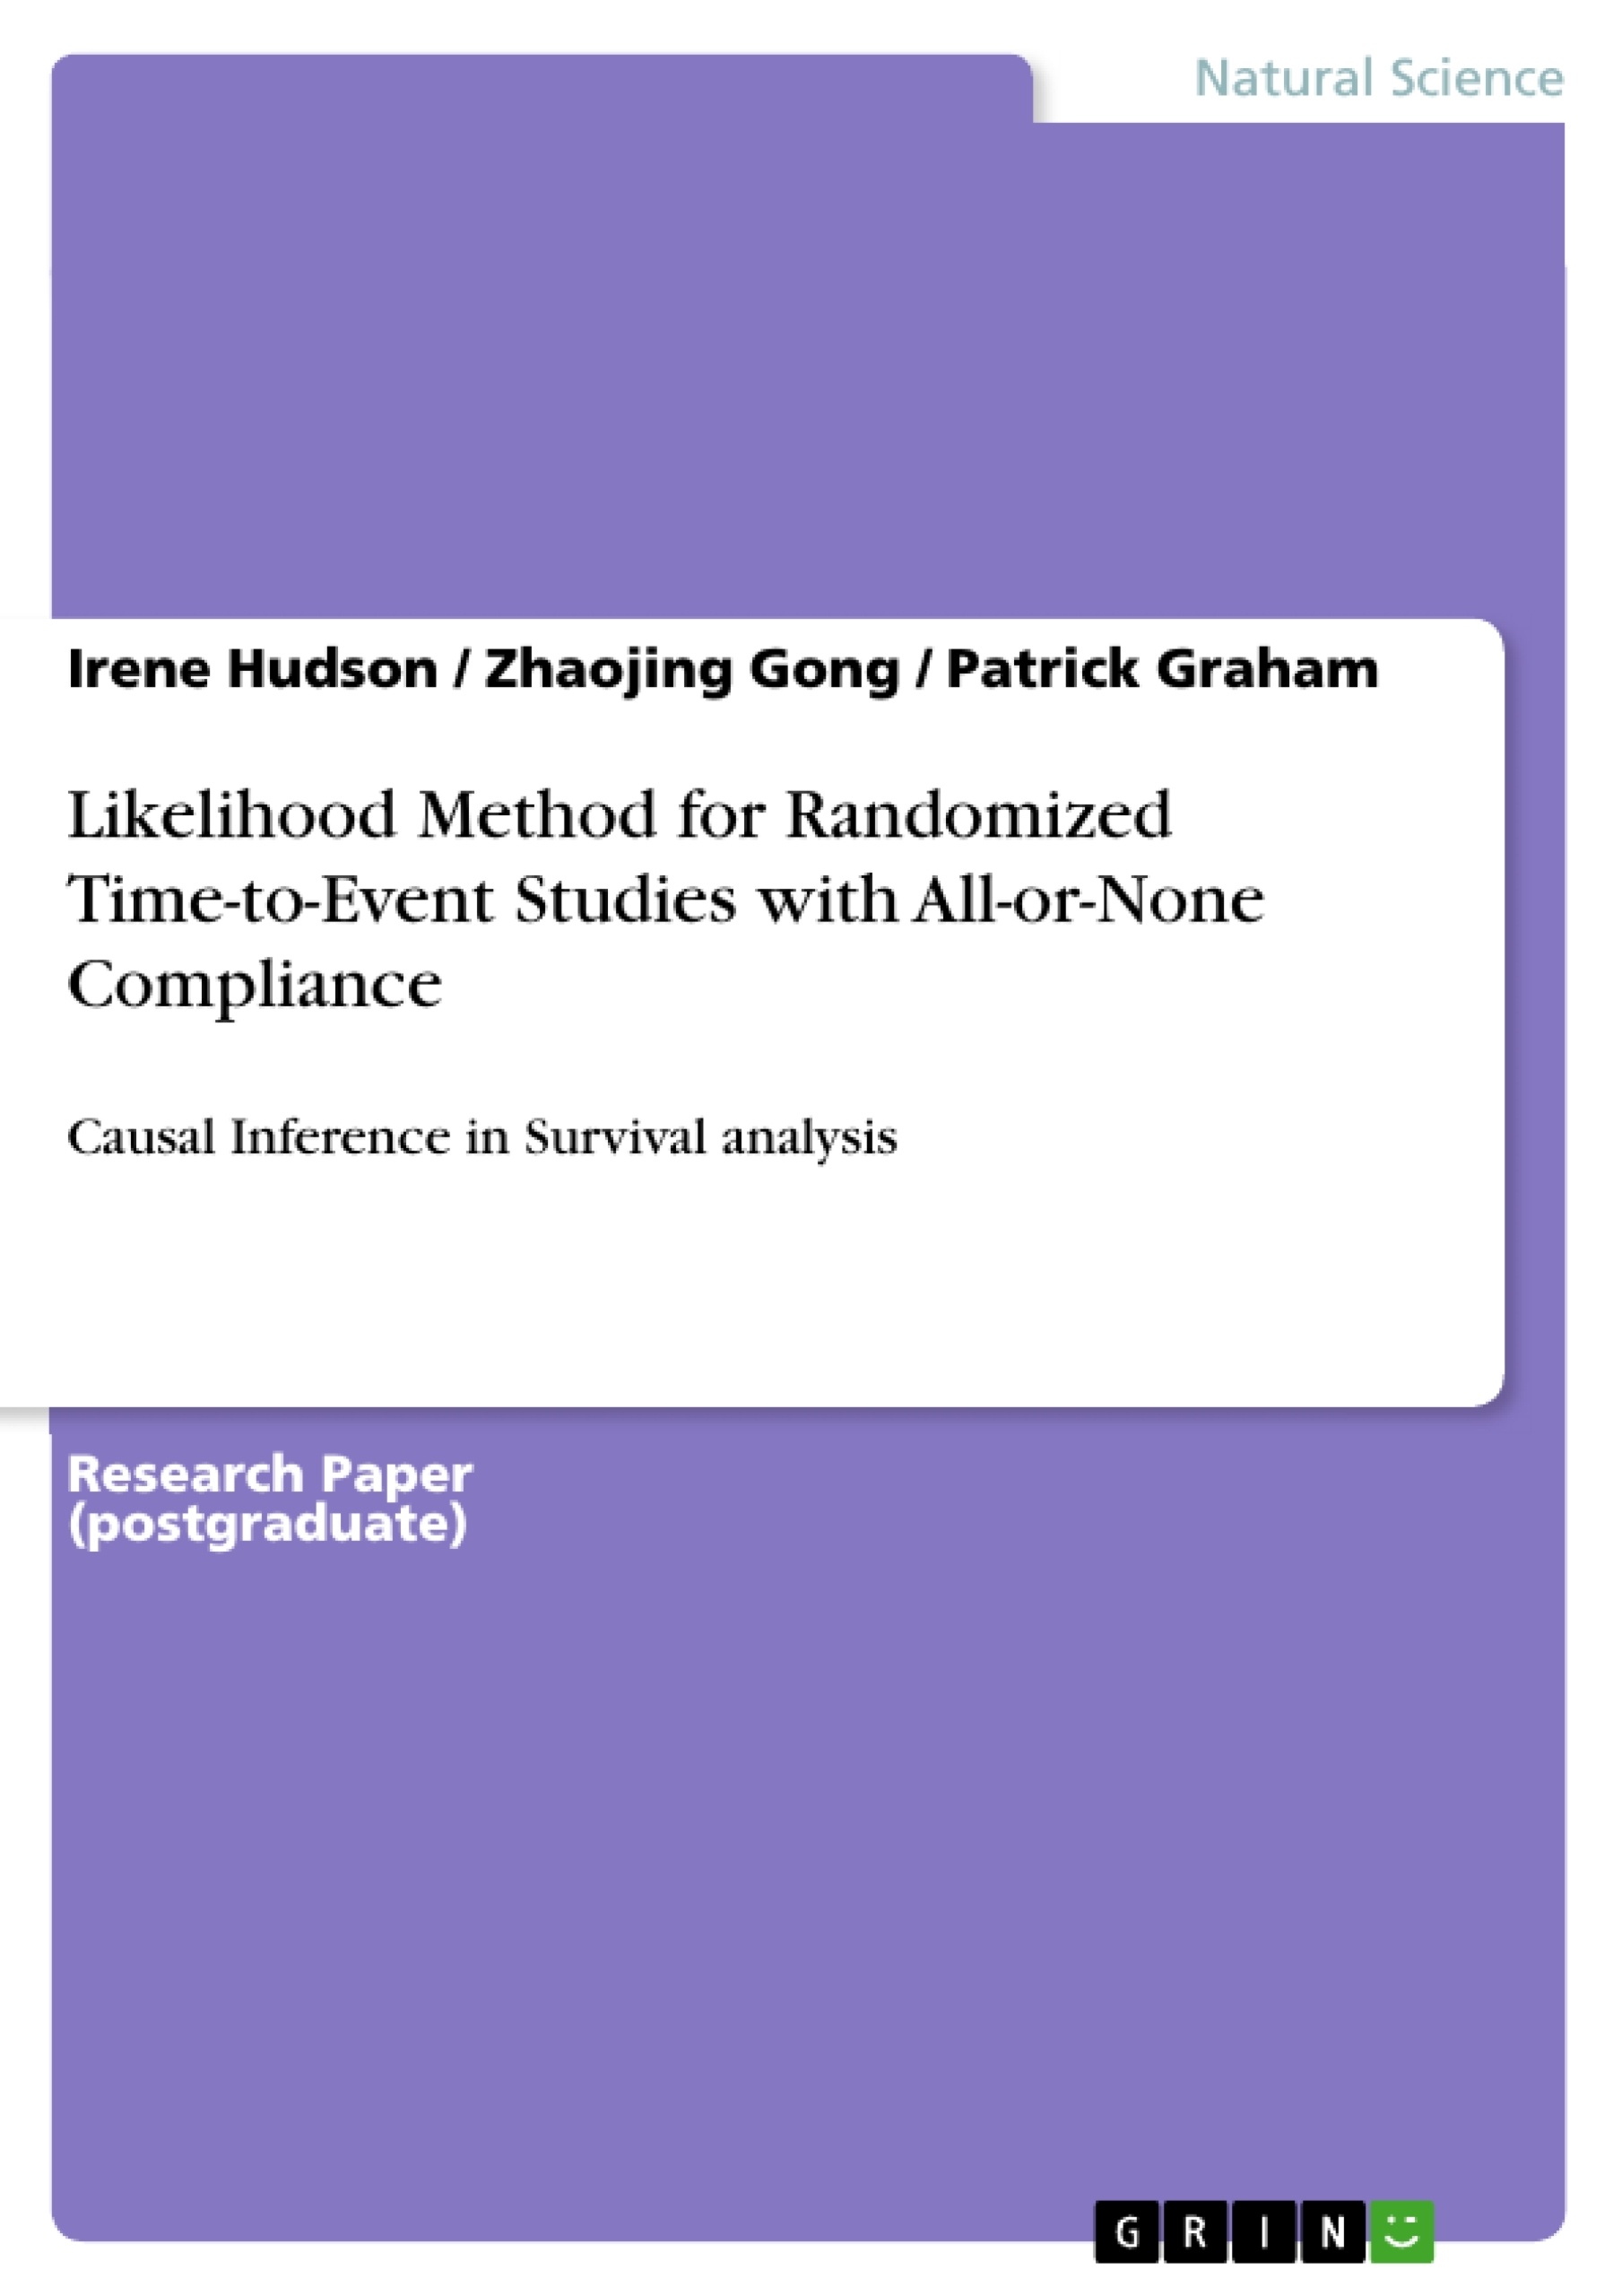 Titel: Likelihood Method for Randomized Time-to-Event Studies with All-or-None Compliance